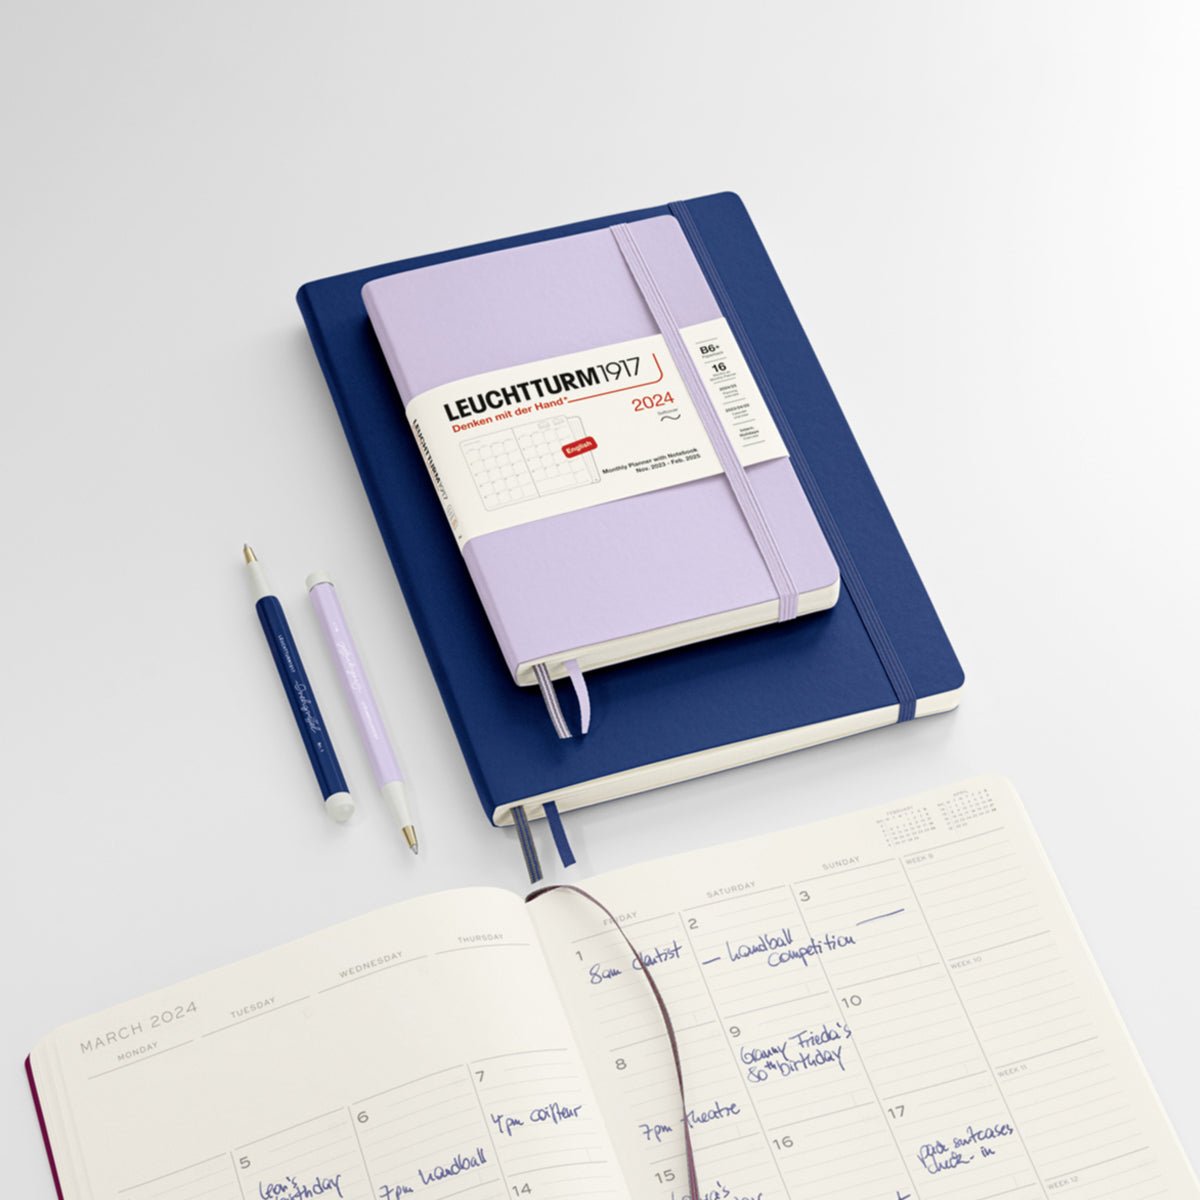 Pen+Gear Weekly Planner, 2022-2023, Dotted Poly Cover 